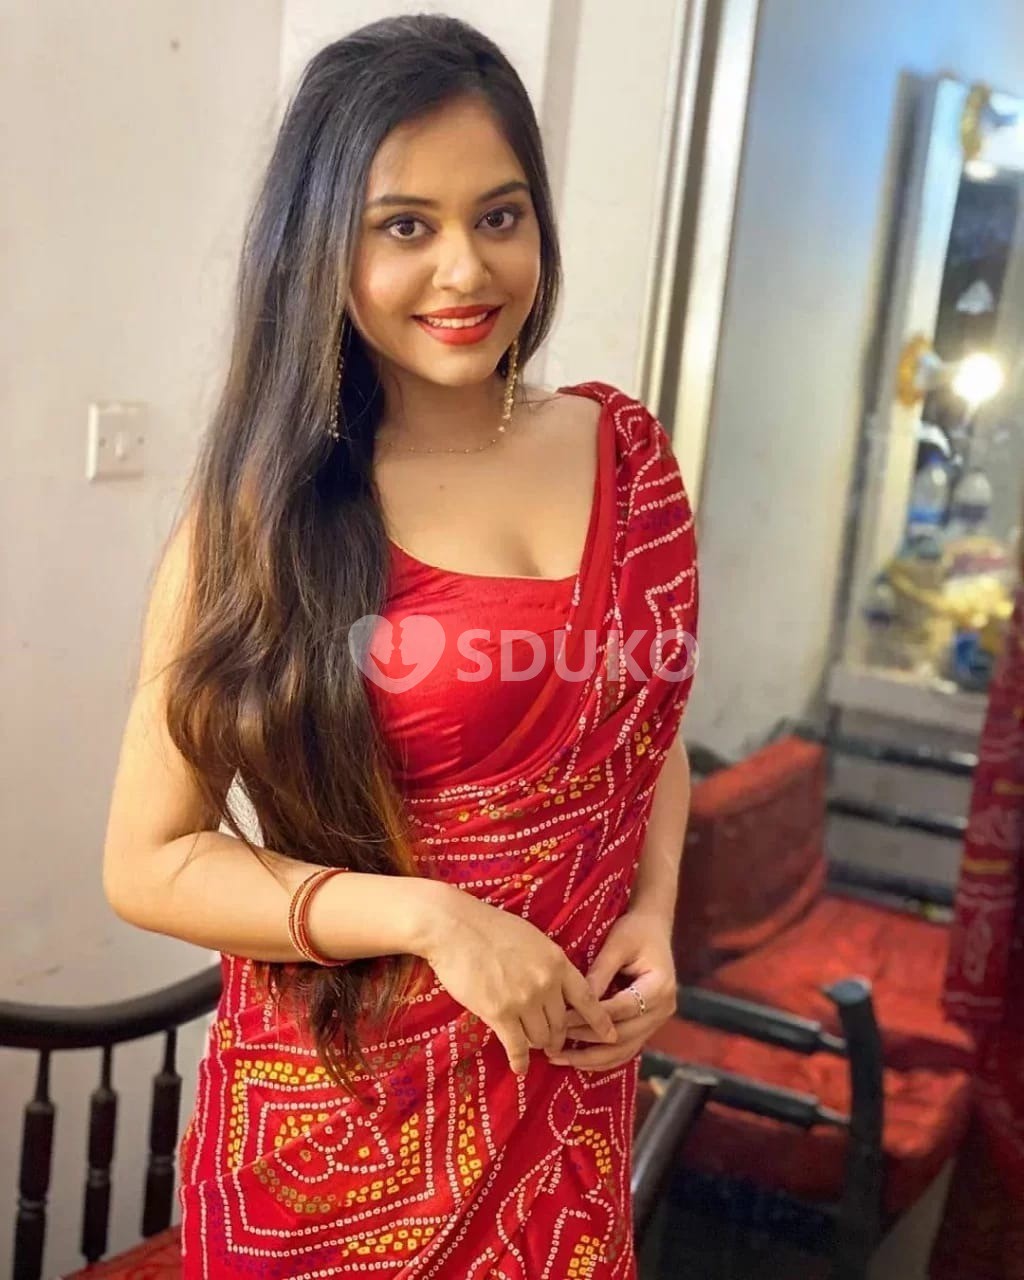 ROHINI 😘 HOME AND HOTEL SERVICE AVAILABLE FULL SAFE AND SECURE SERVICE AVAILABLE HETAL 21